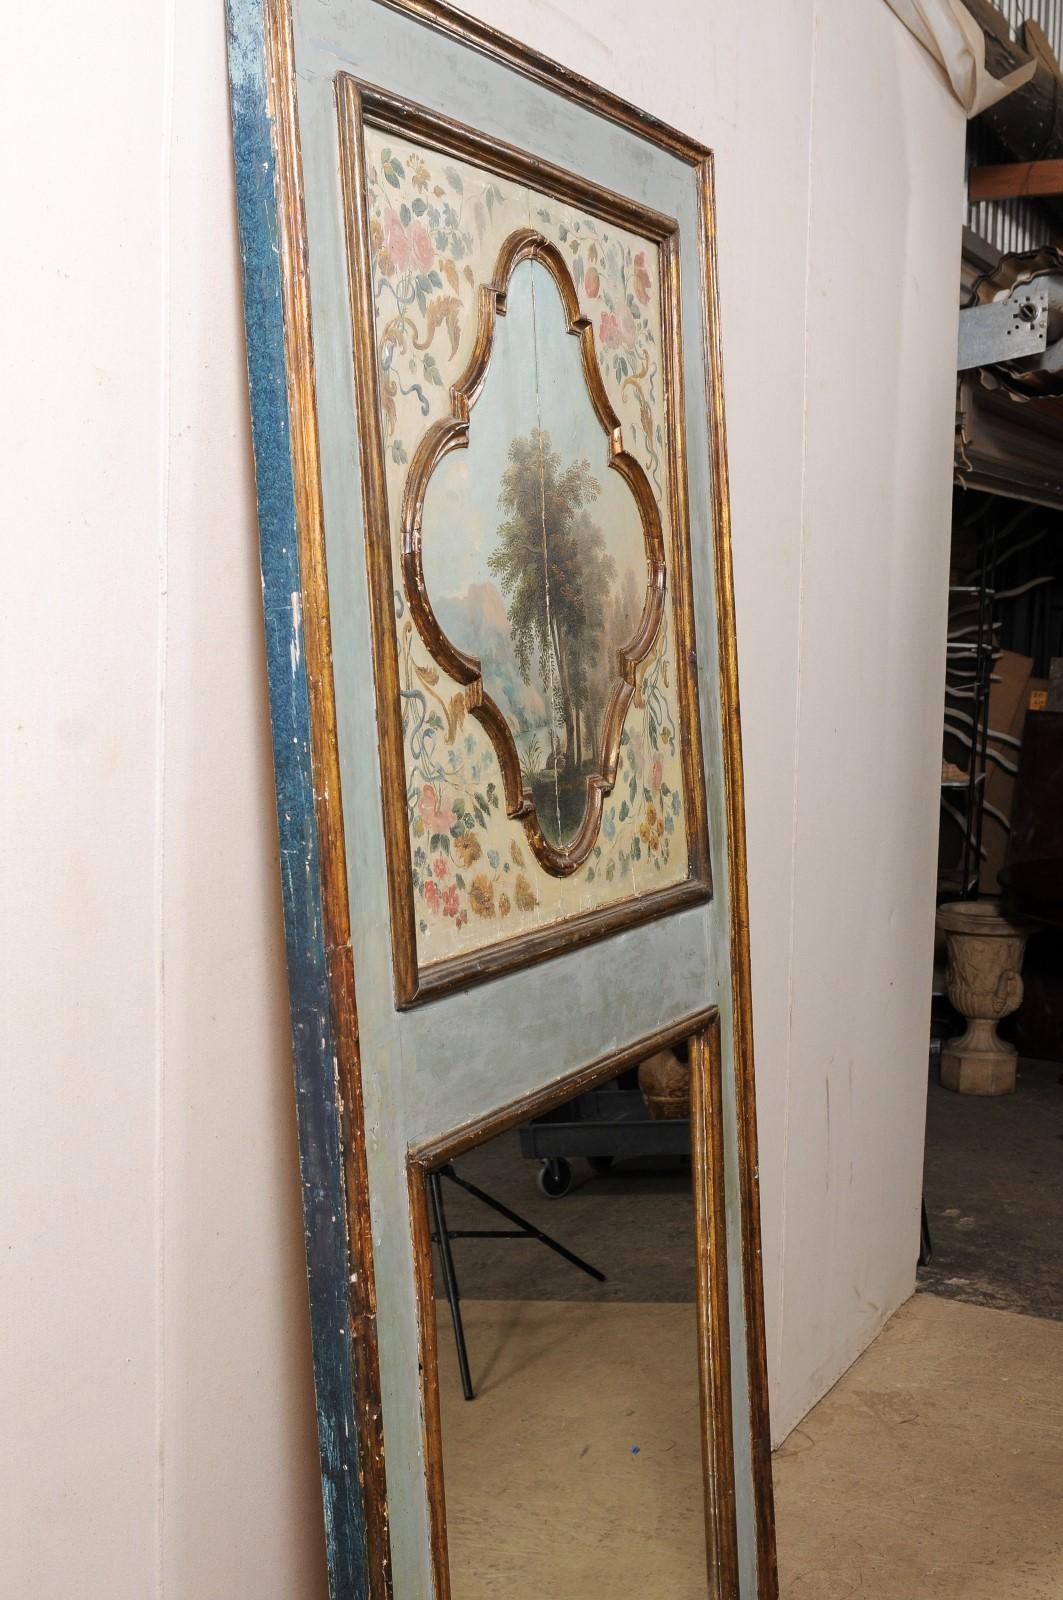 Italian 19th C. Pier Mirror w/ Serene Landscape Oil Painting at Top Panel For Sale 6